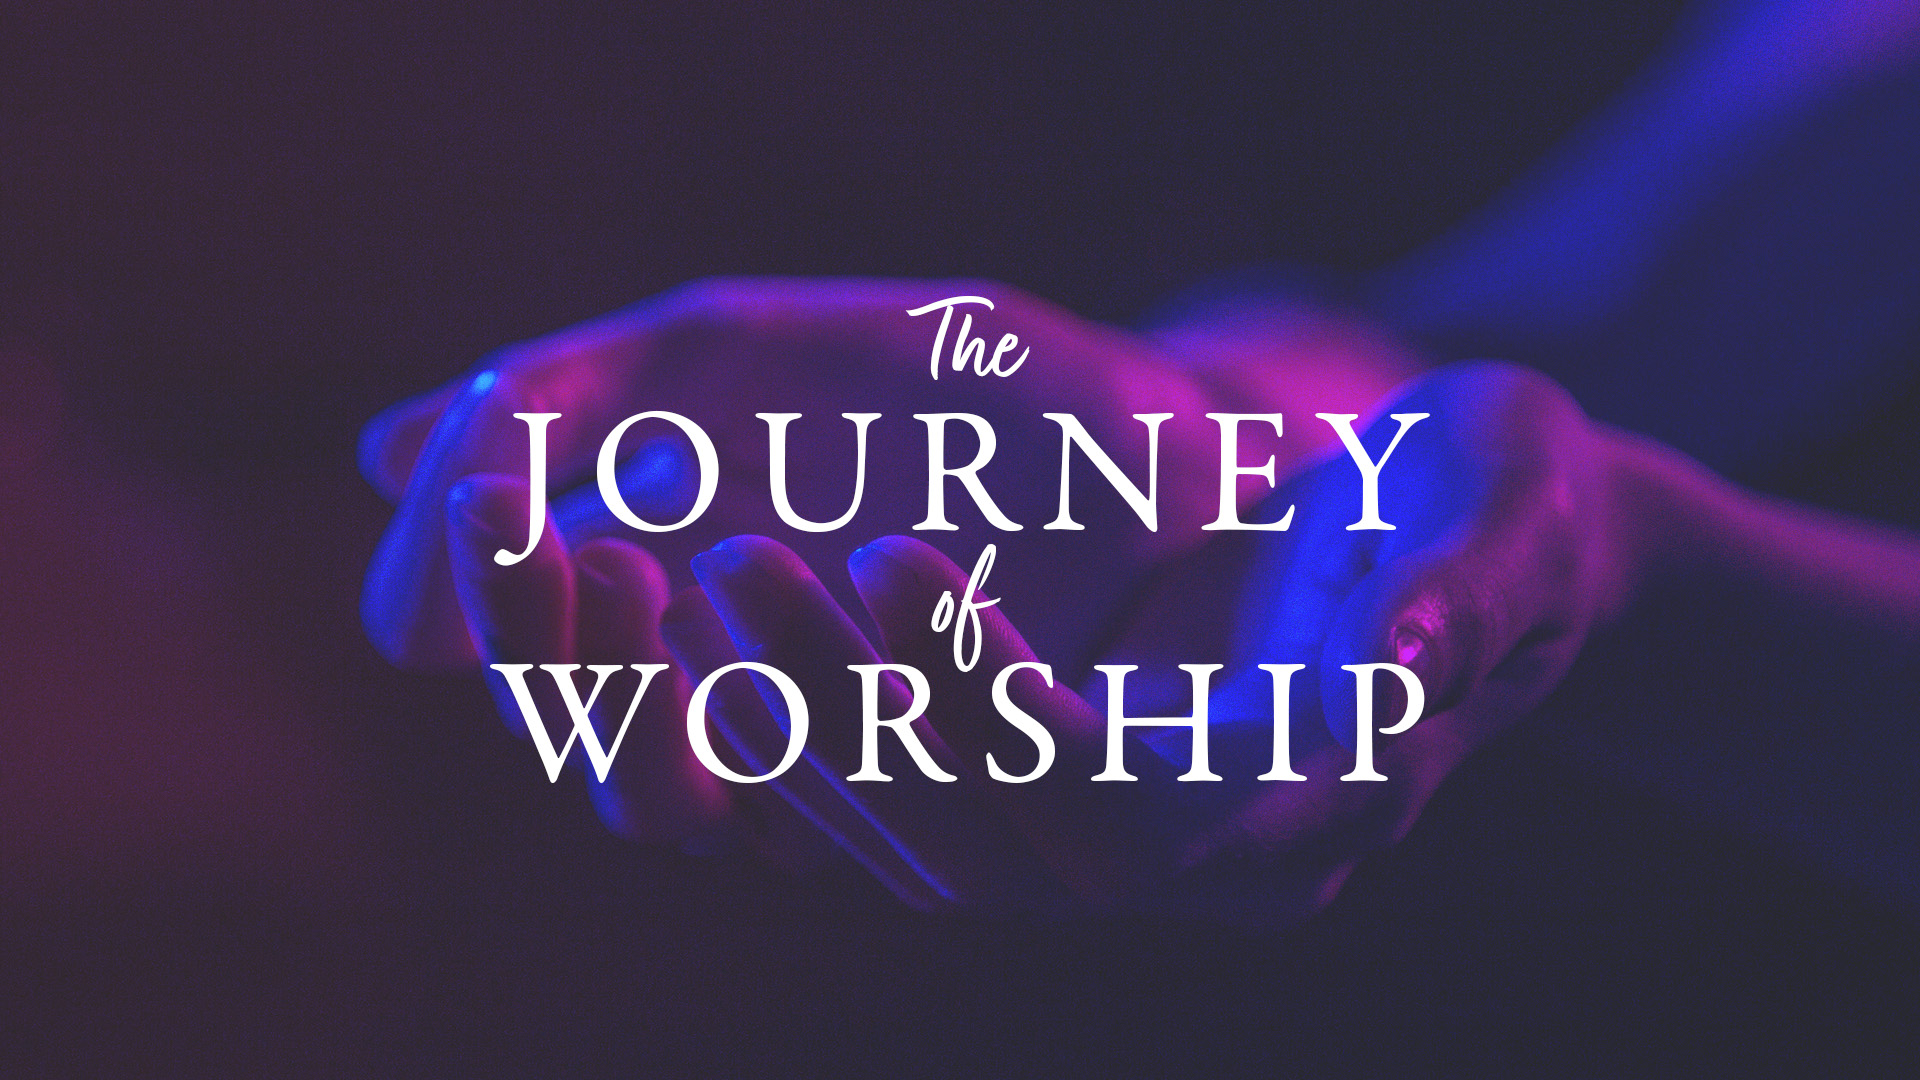 The Journey of Worship